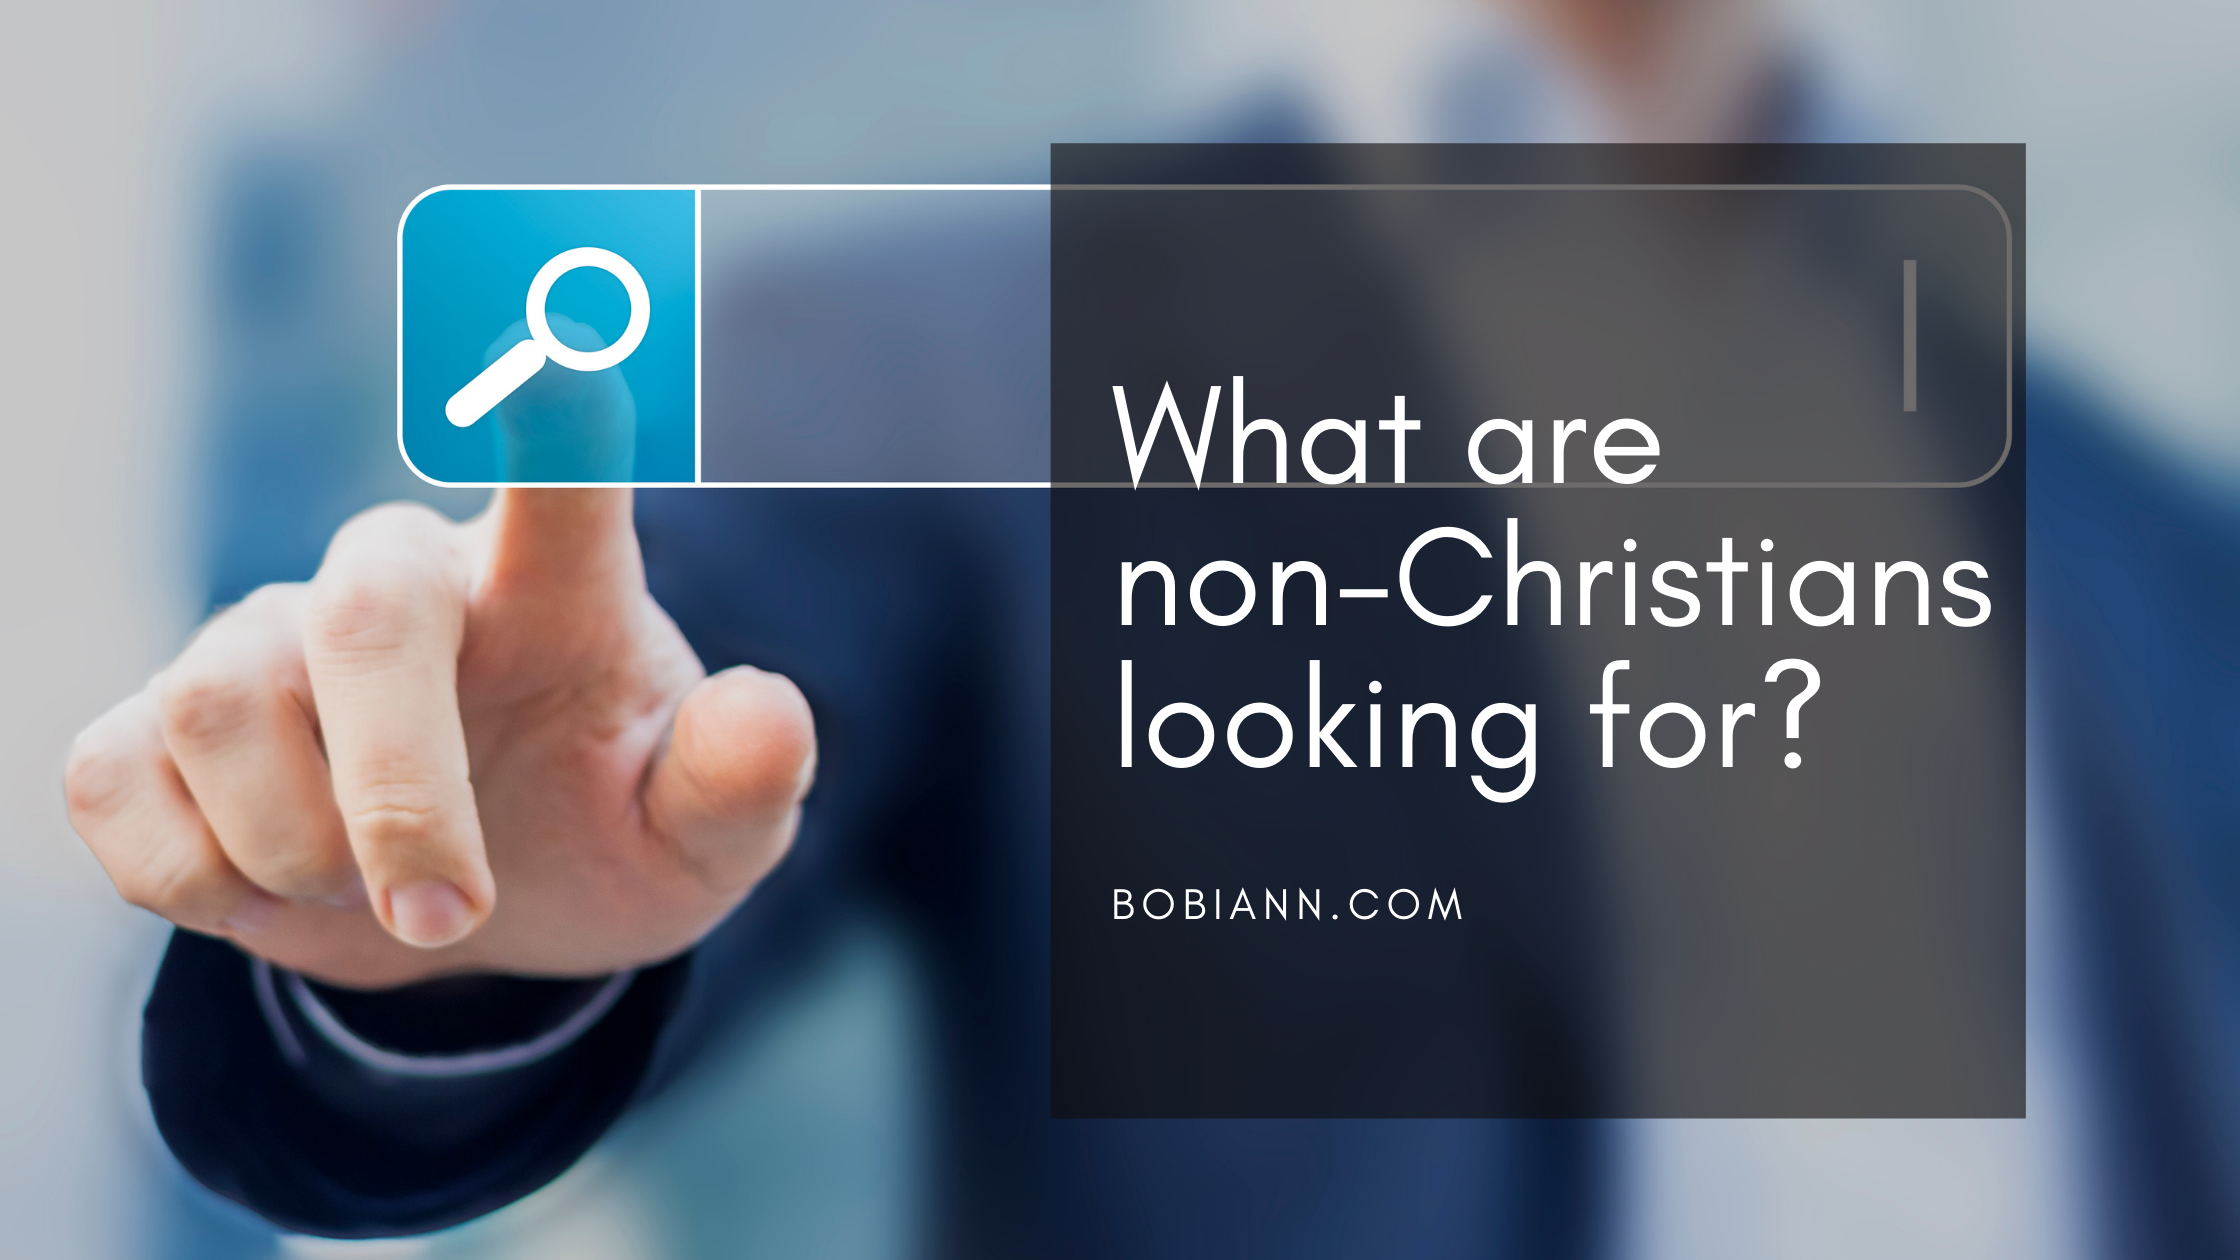 What are non-Christians looking for?